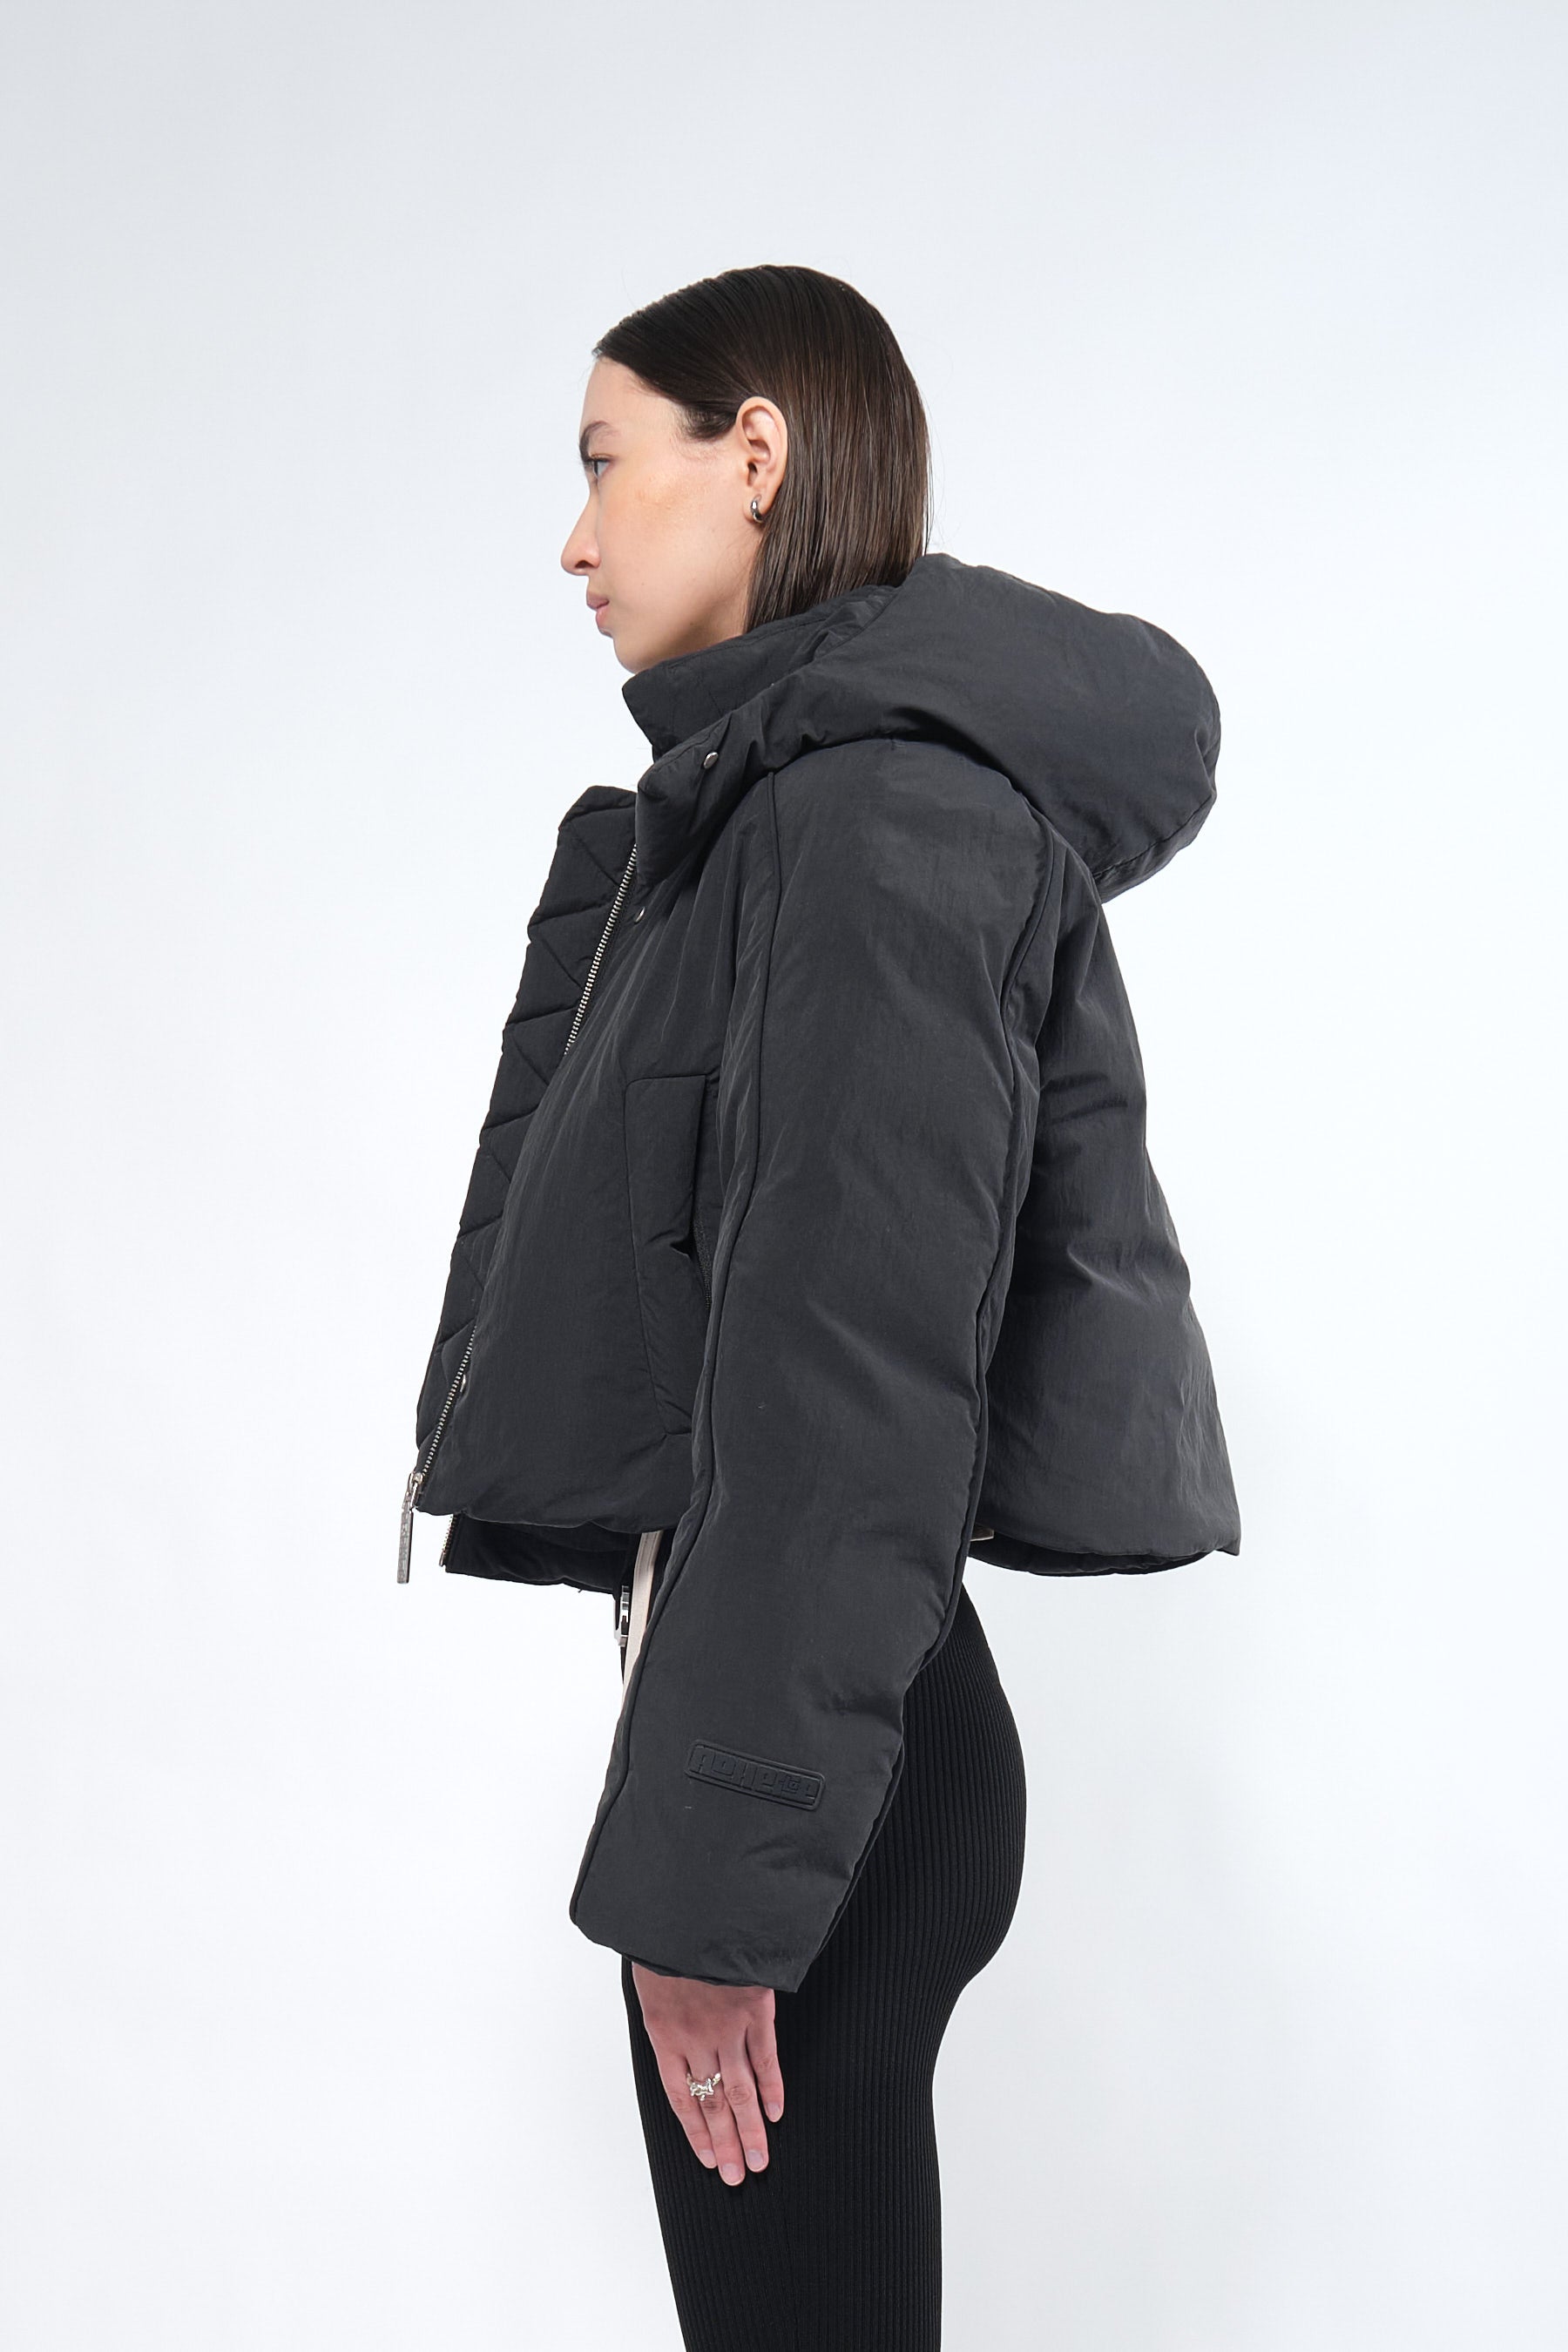  Re:Down® Crop Black Puffer Jacket with Hood - Adhere To  - 3